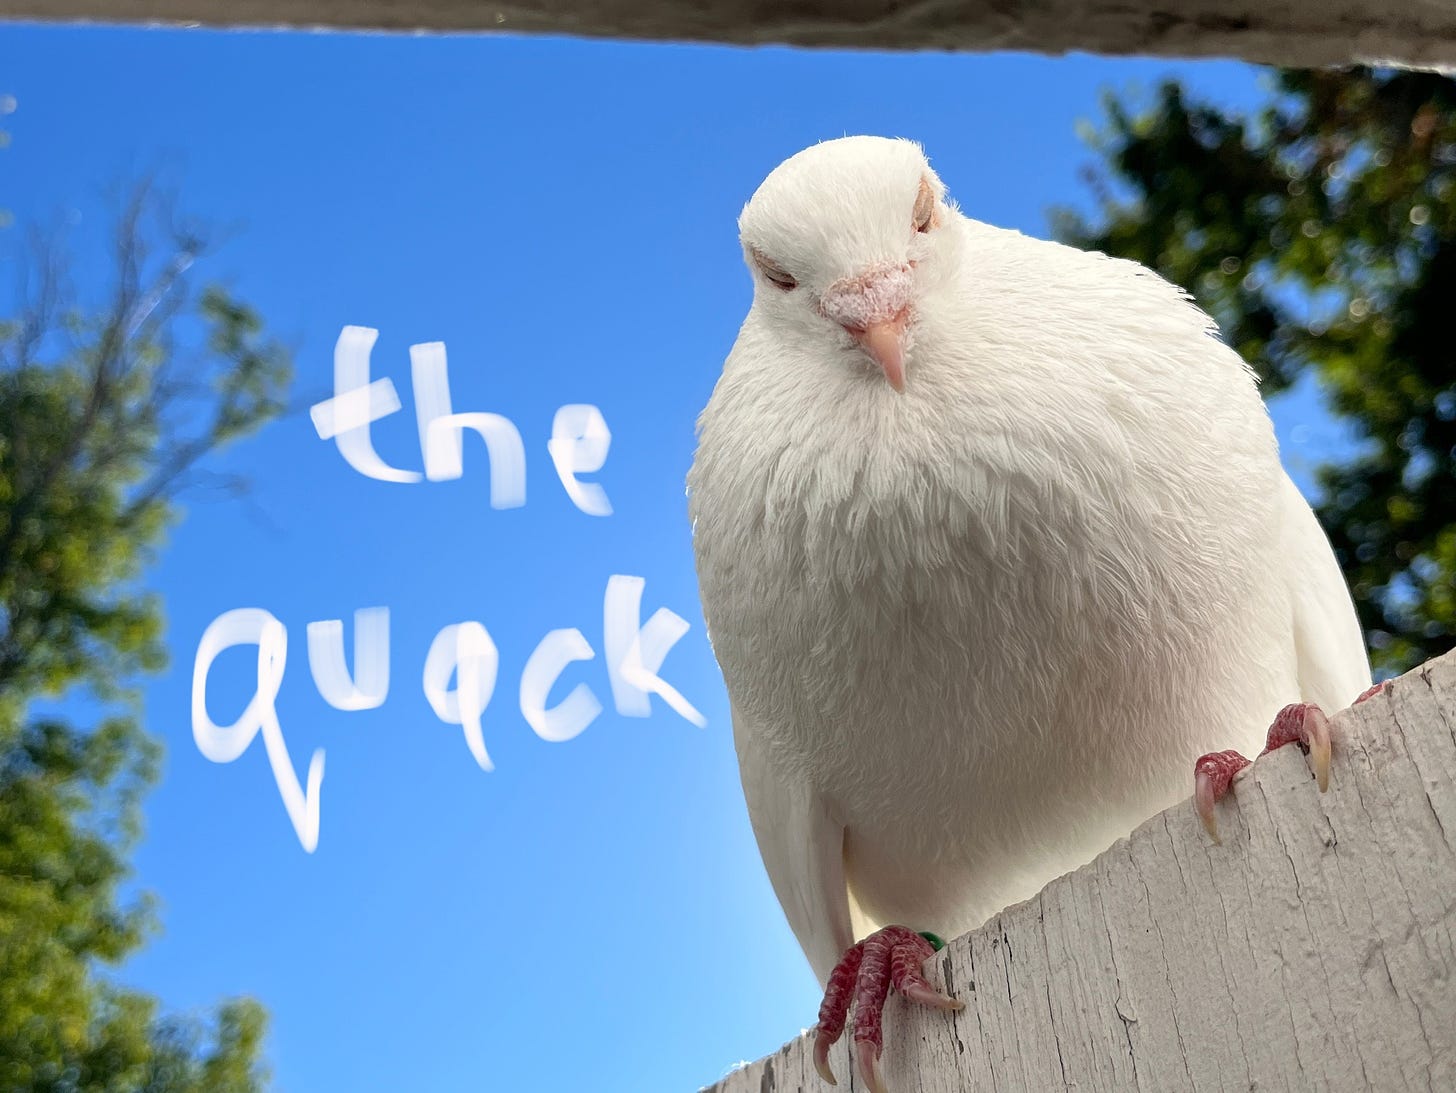 A white pigeon glares down from its perch on the top of a shed door, the words "the quack" are written on the blue sky with whispy cloud like letters